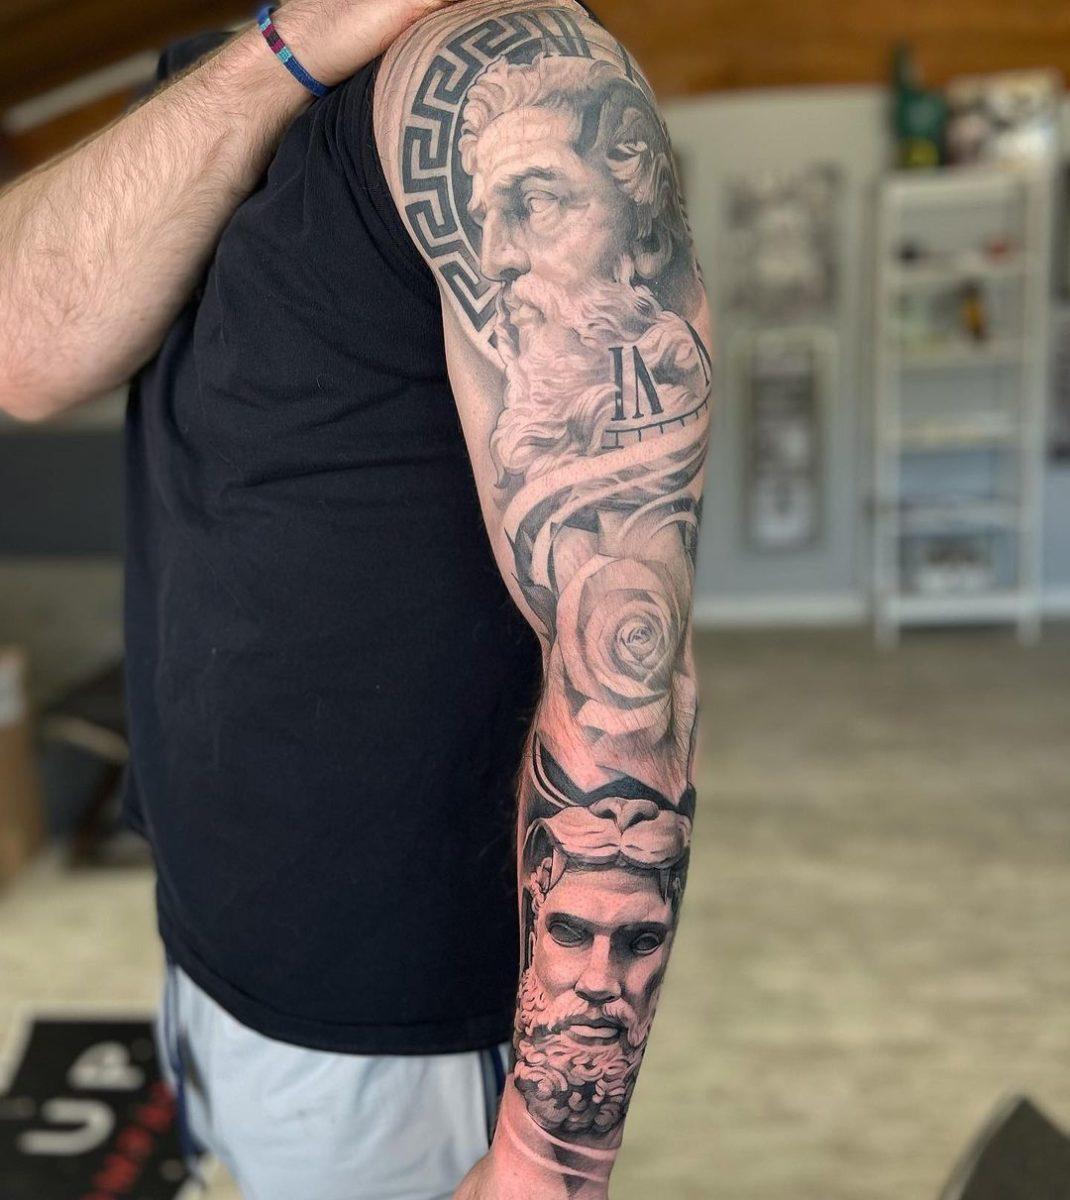 Against half rise sleeve tattoo Research reveals